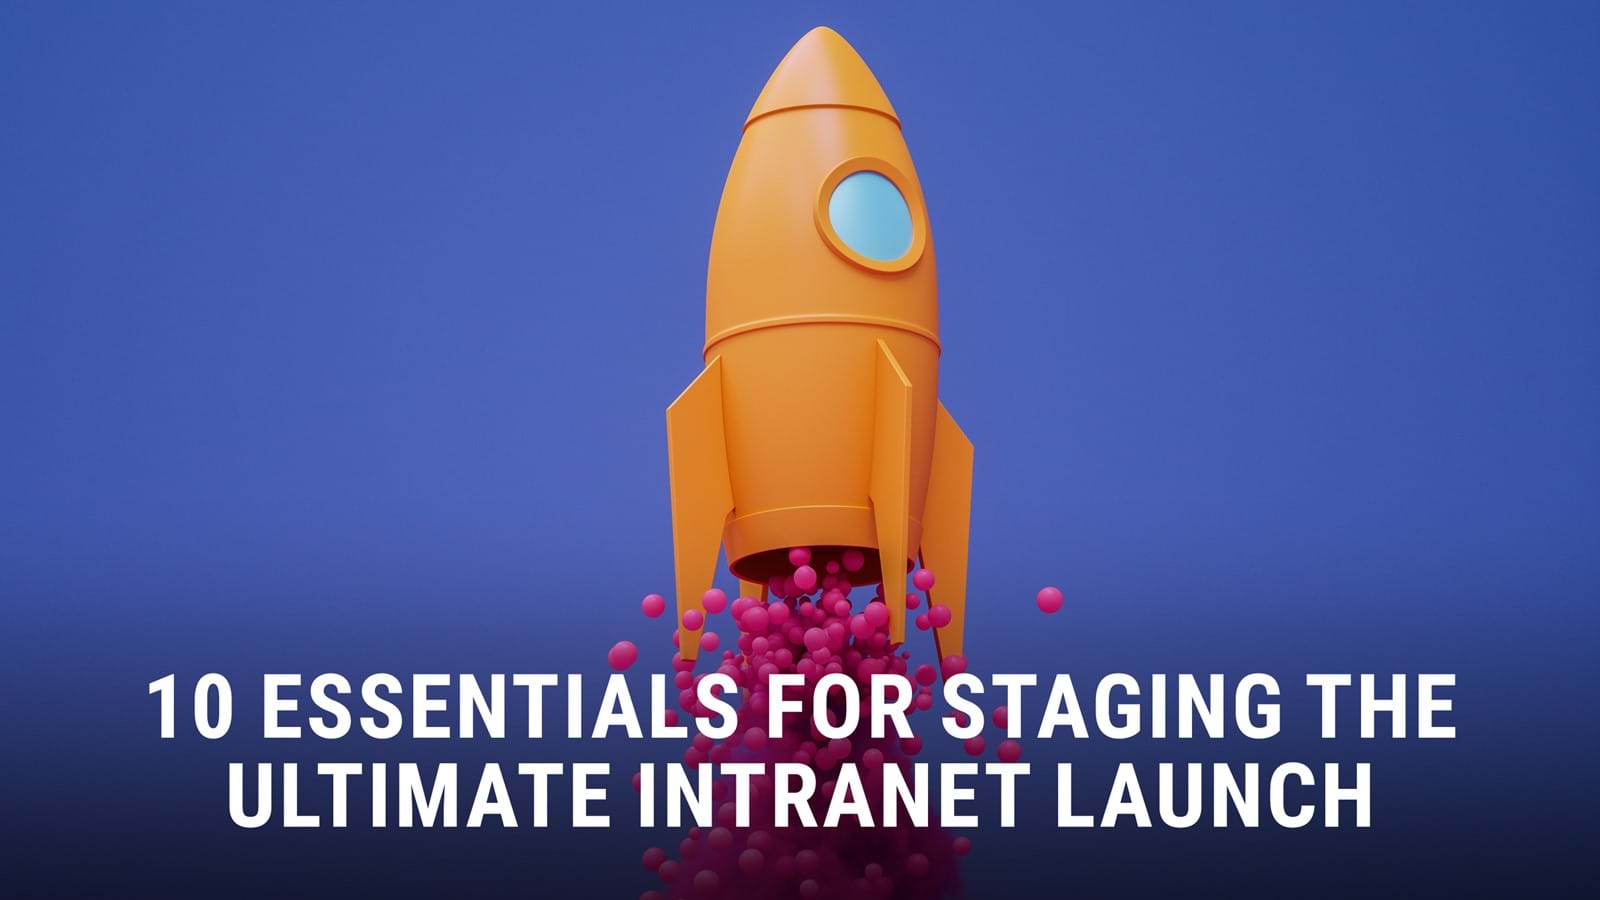 Intranet launch guide cover